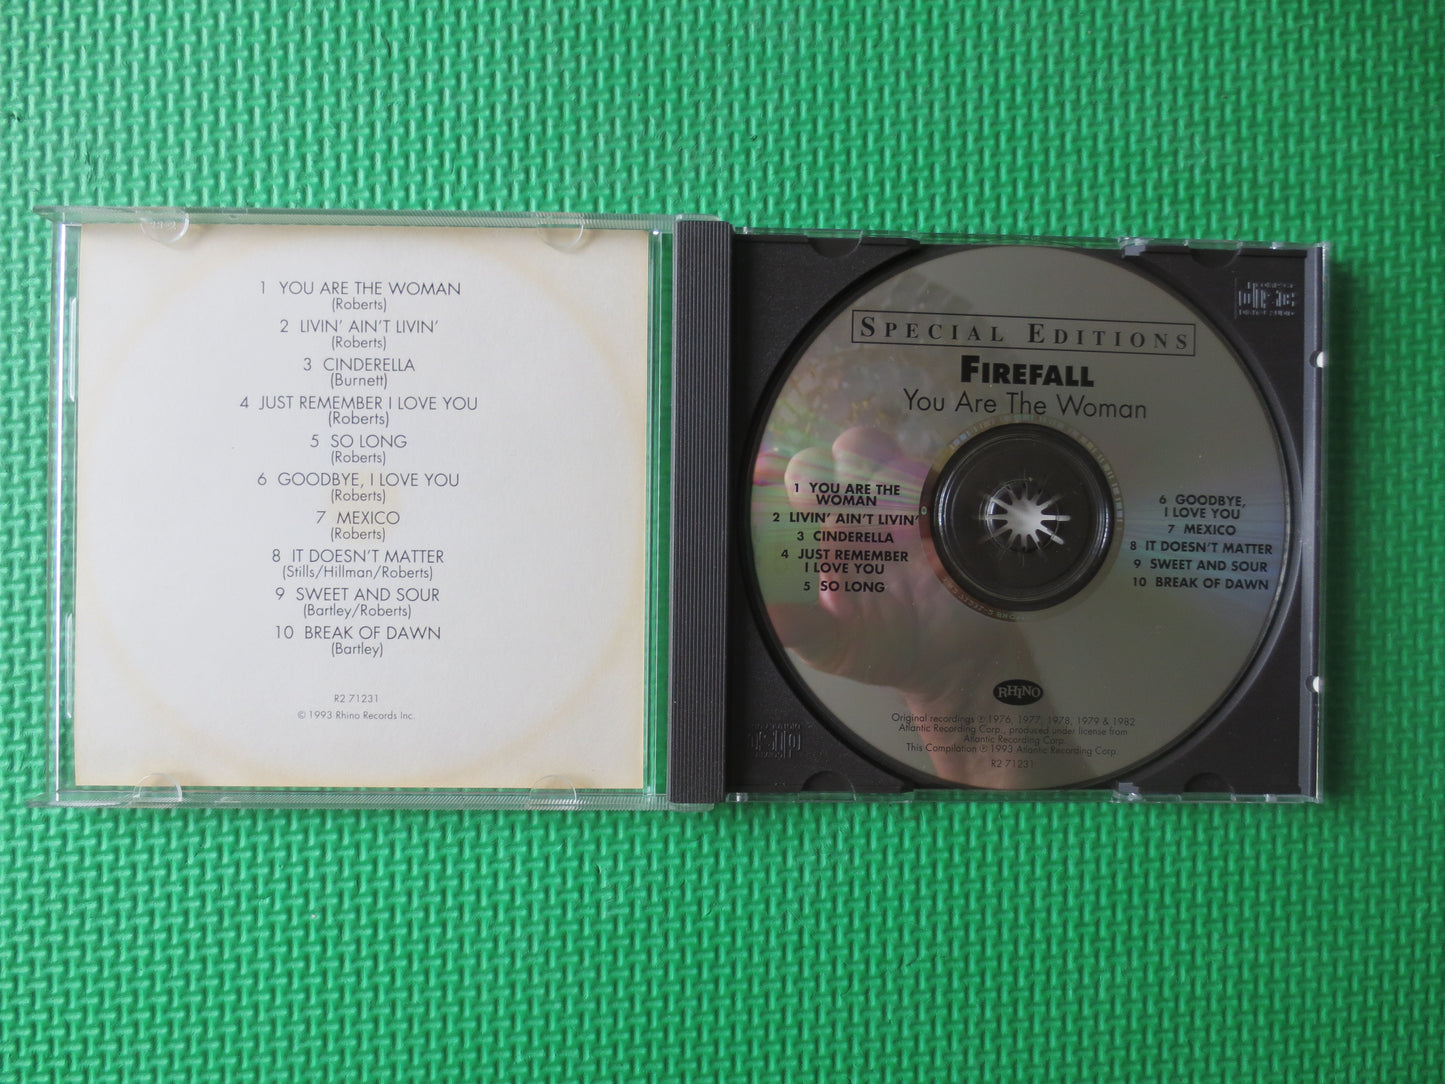 FIREFALL, You Are The Woman, FIREFALL Cd, Music Cd, Country Music Cd, FIREFALL Lp, Country Cd, Country Music, 1993 Compact Disc